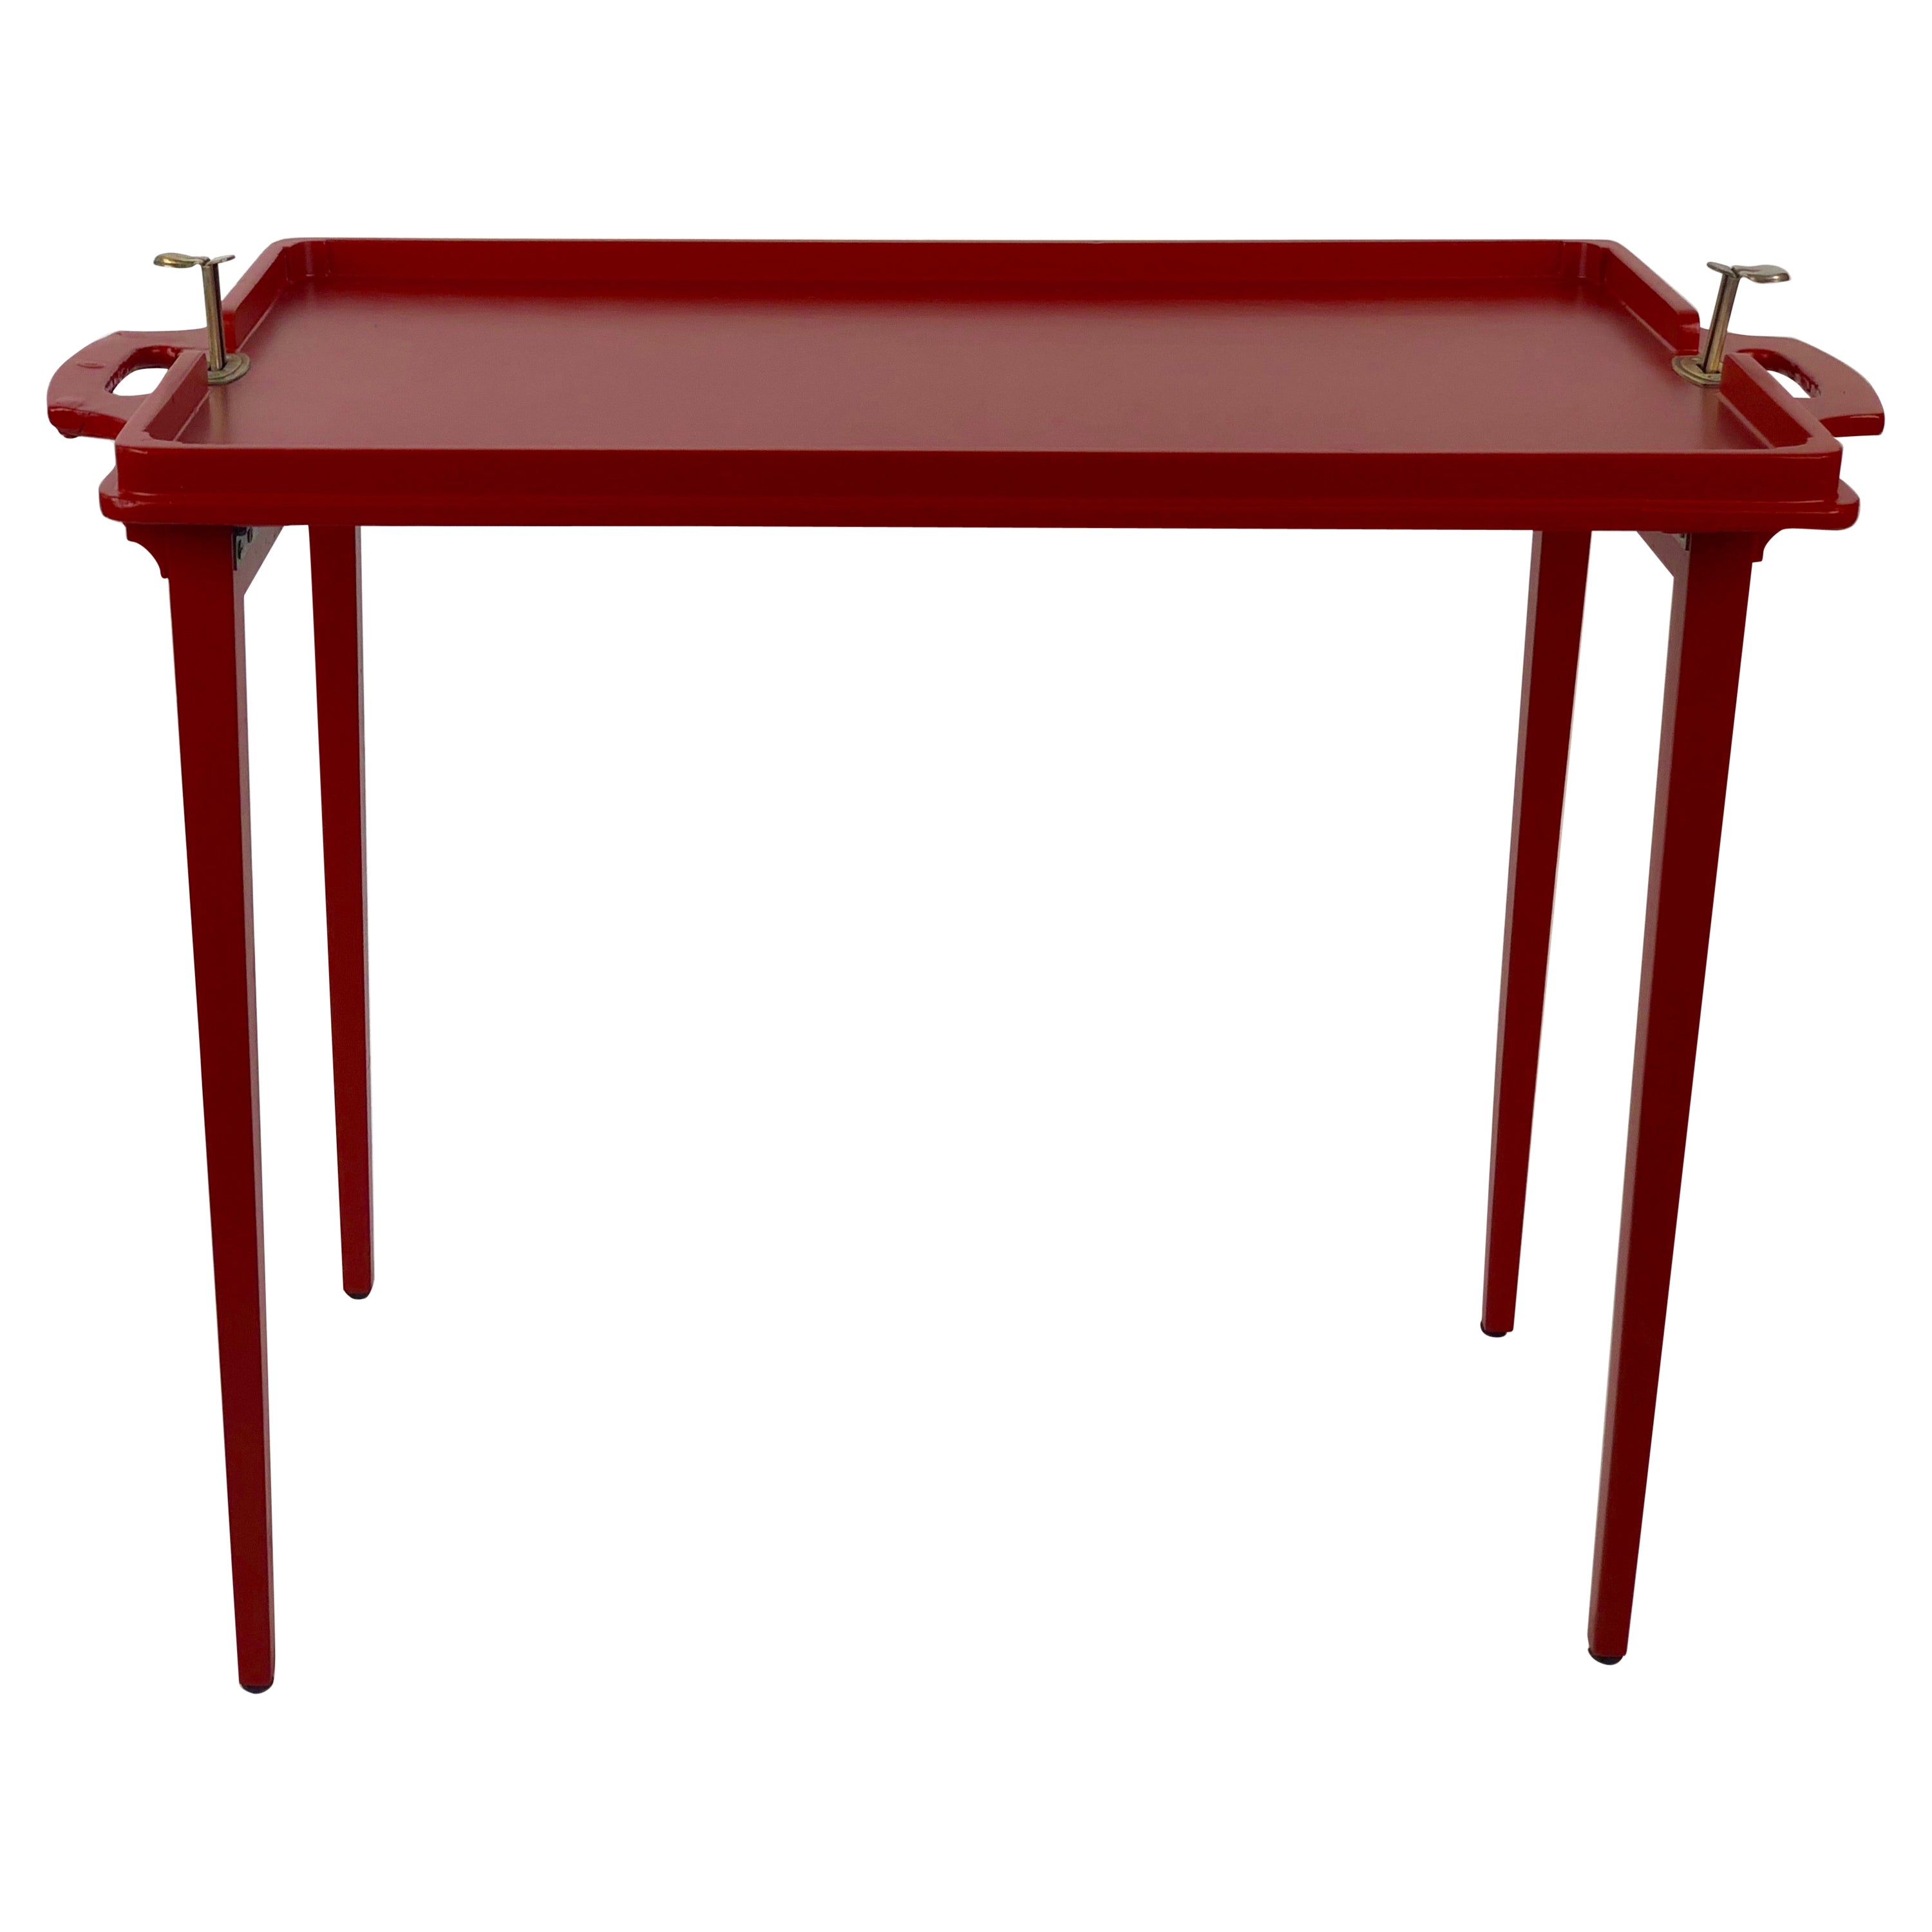 Folding Wooden Tray Table from Austria, 1930's, in Burnt Orange Colour